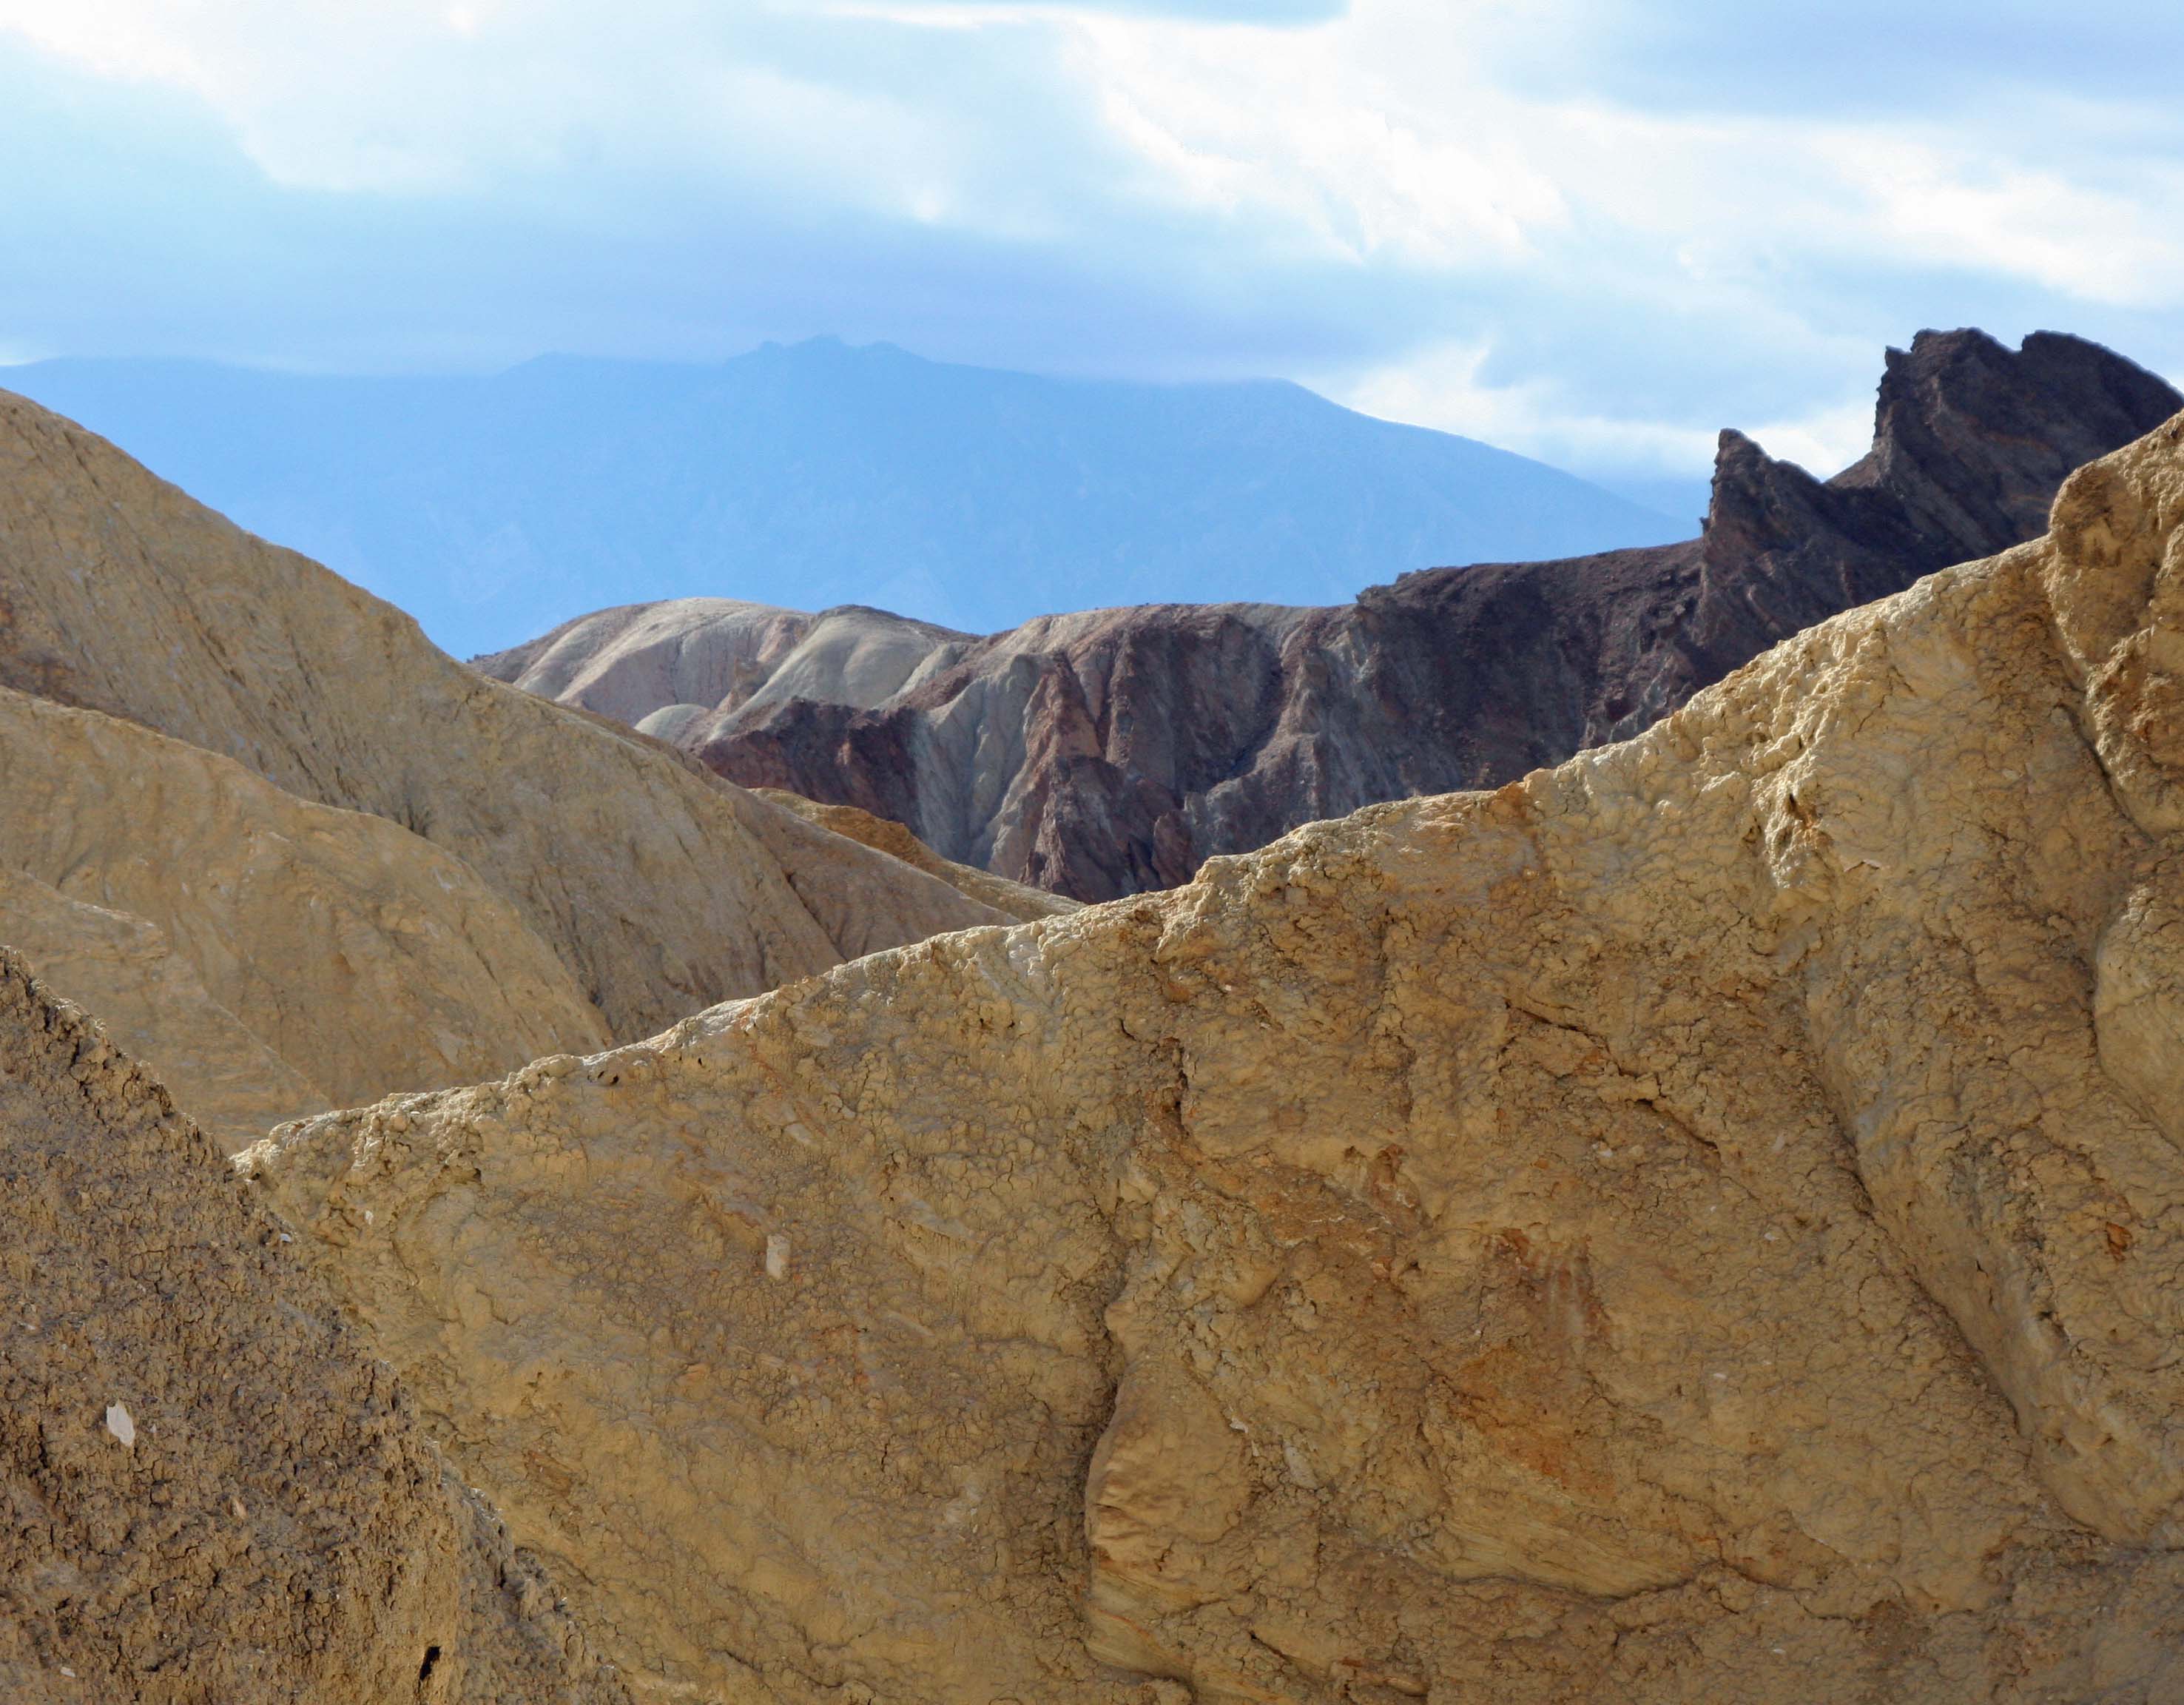 Golden Canyon, Death Valley. Photo by Curtis Mekemson.